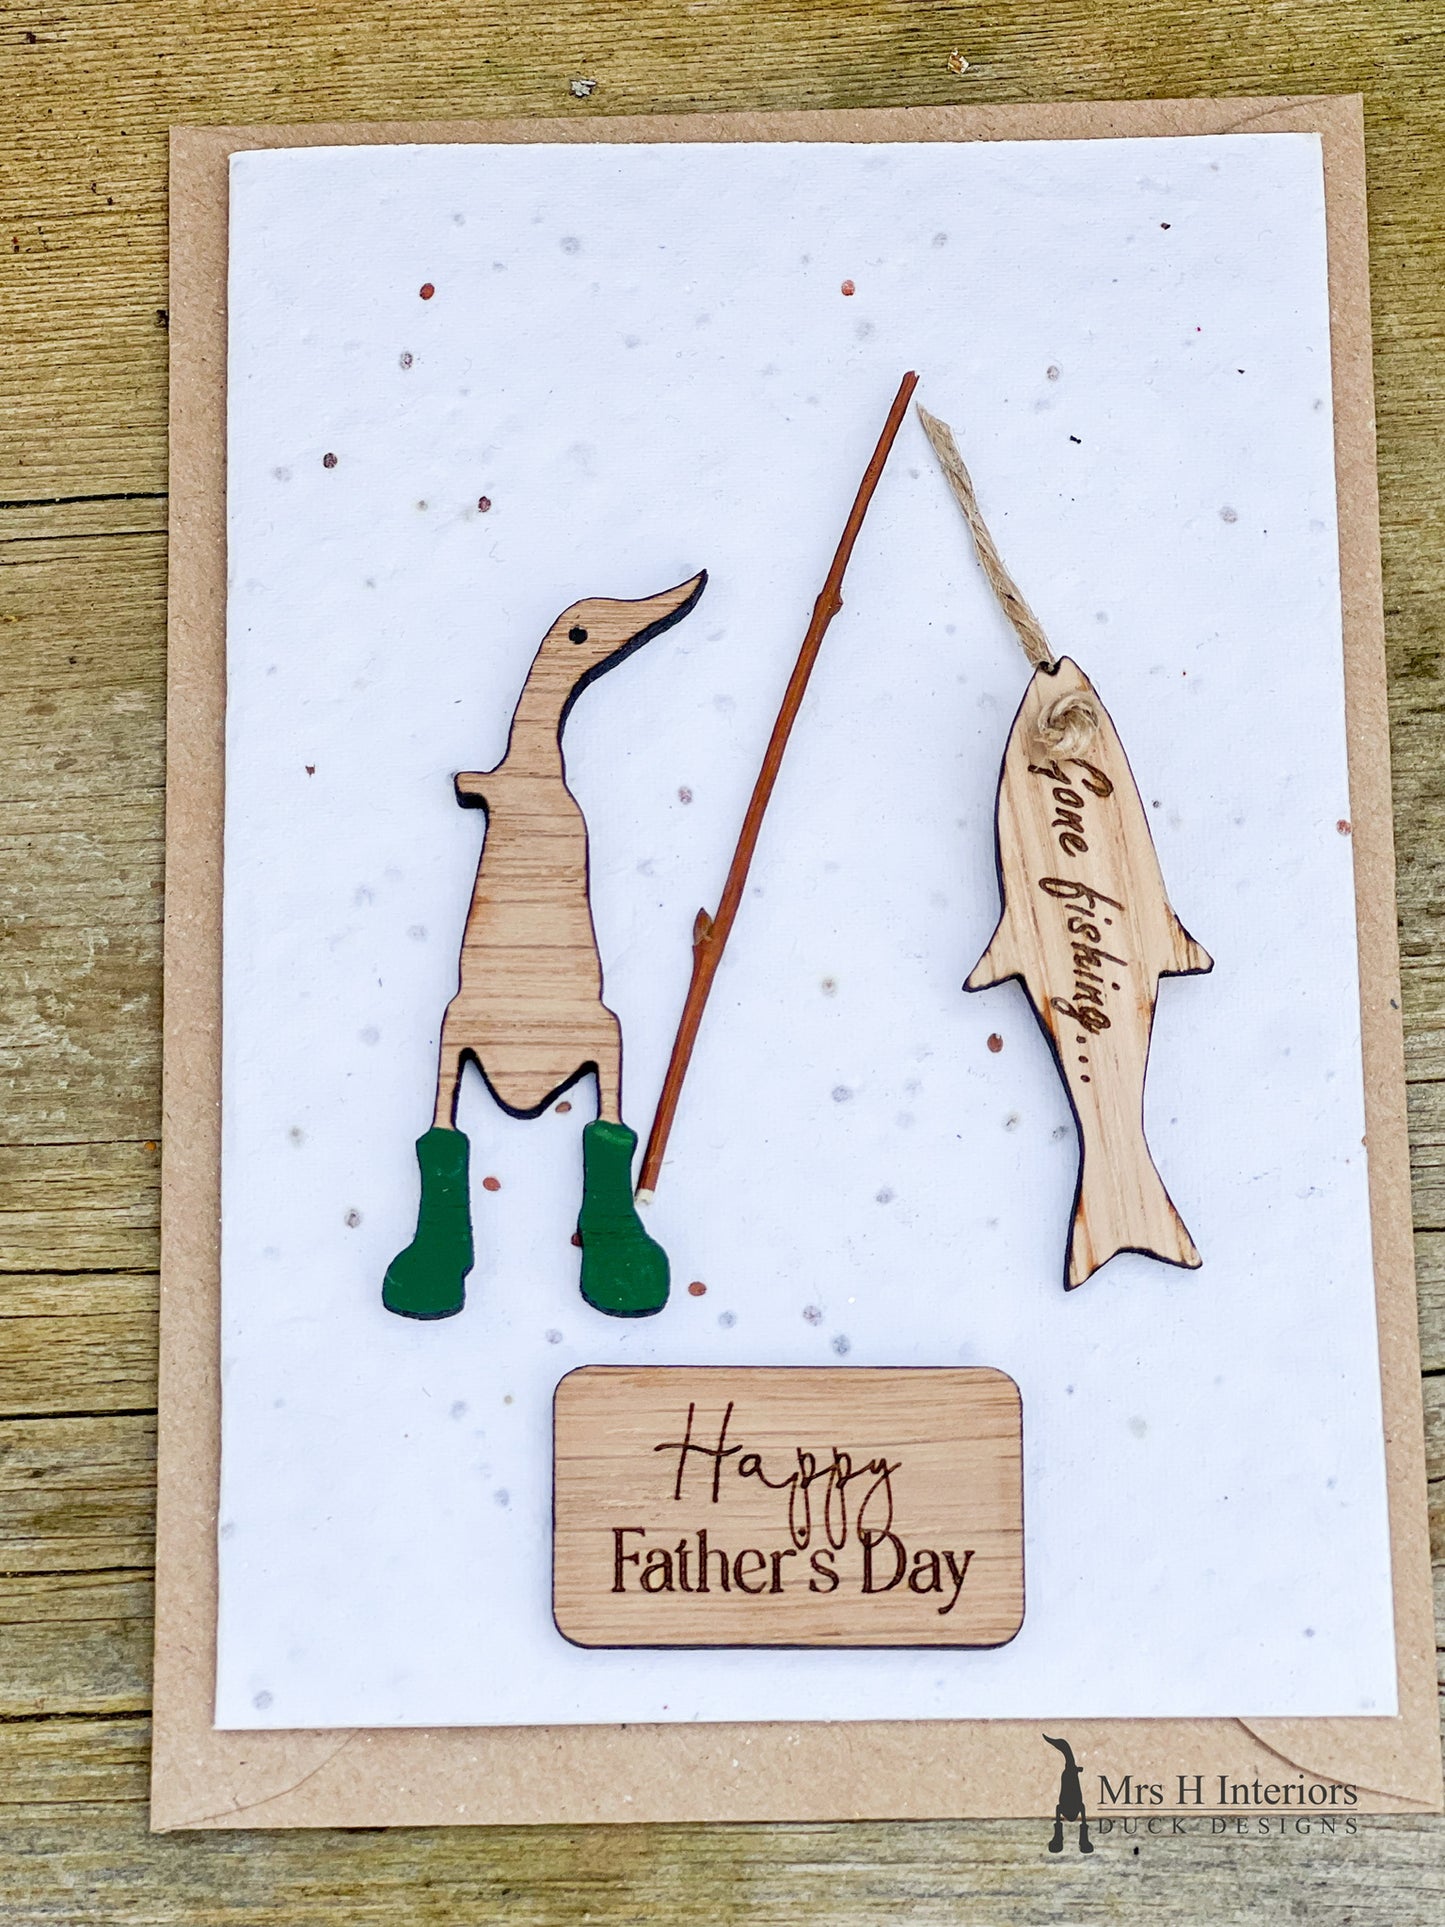 Fishing - Birthday or Father’s Day Greetings Card - Decorated Wooden Duck in Boots by Mrs H the Duck Lady